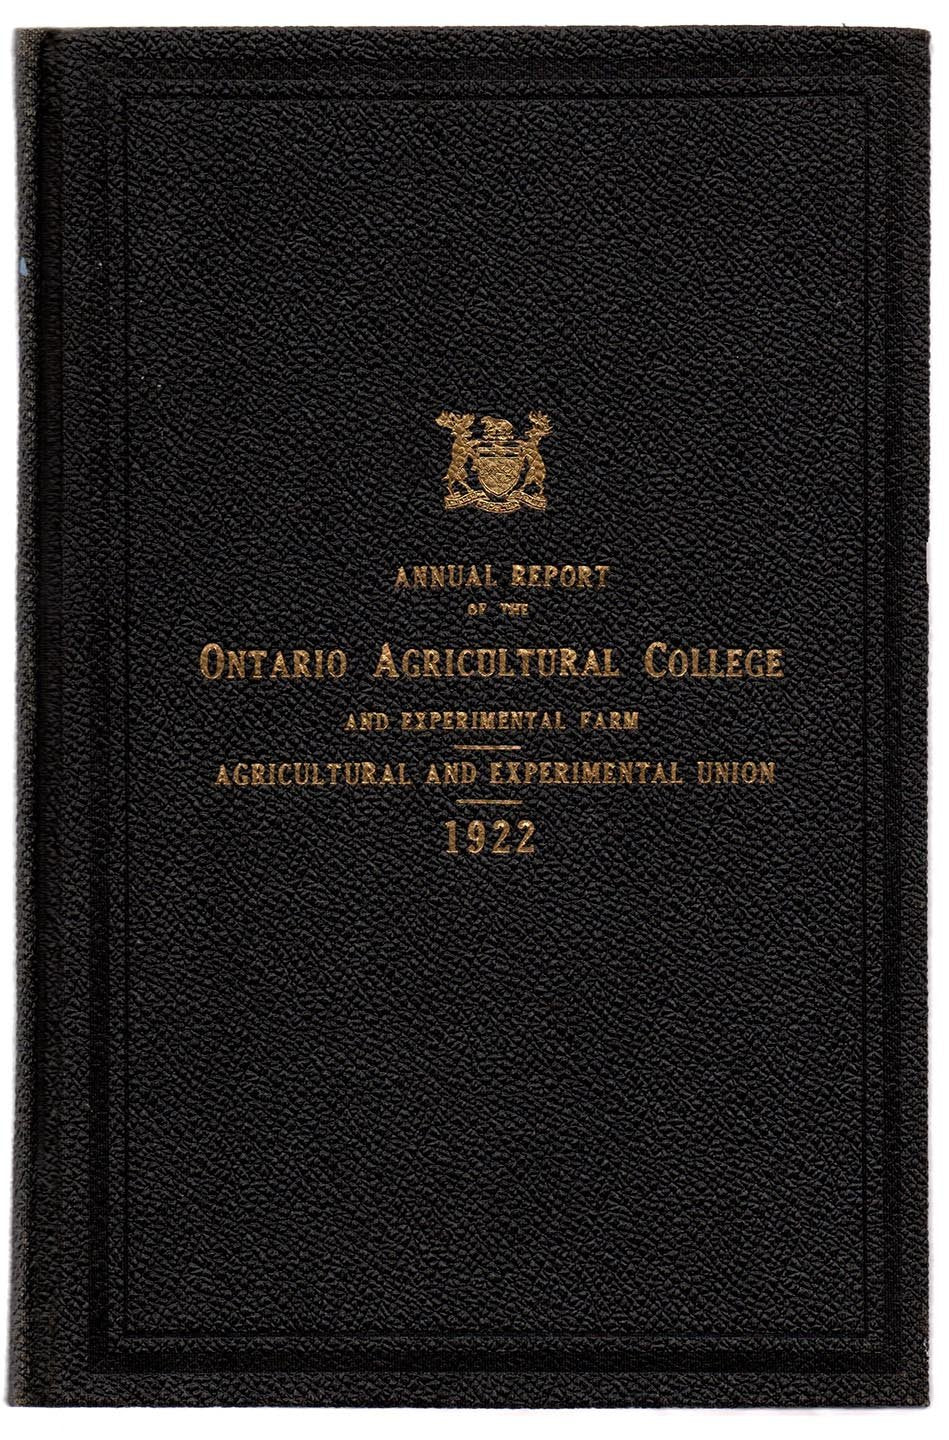 Forty-eighth Annual Report of the Ontario Agricultural College and Experimental Farm 1922; Forty-fourth Annual Report of the Agricultural and Experimental Union 1922